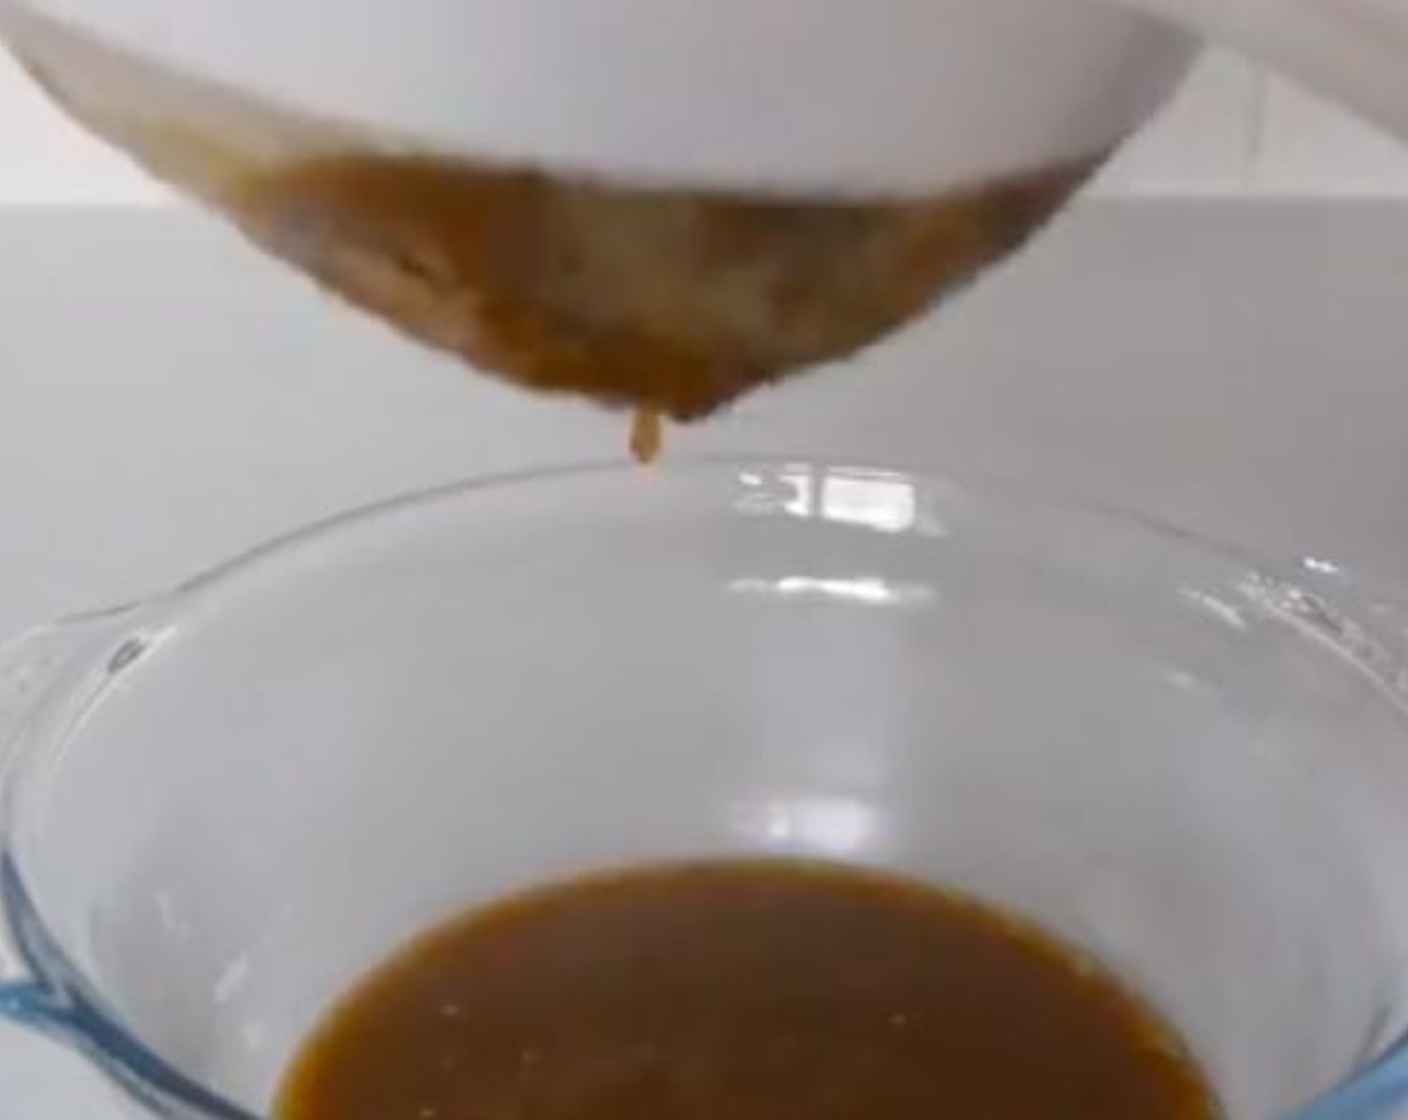 step 10 After, pass the gravy through a sieve or fine colander to remove all large bits and finish with a smooth gravy.